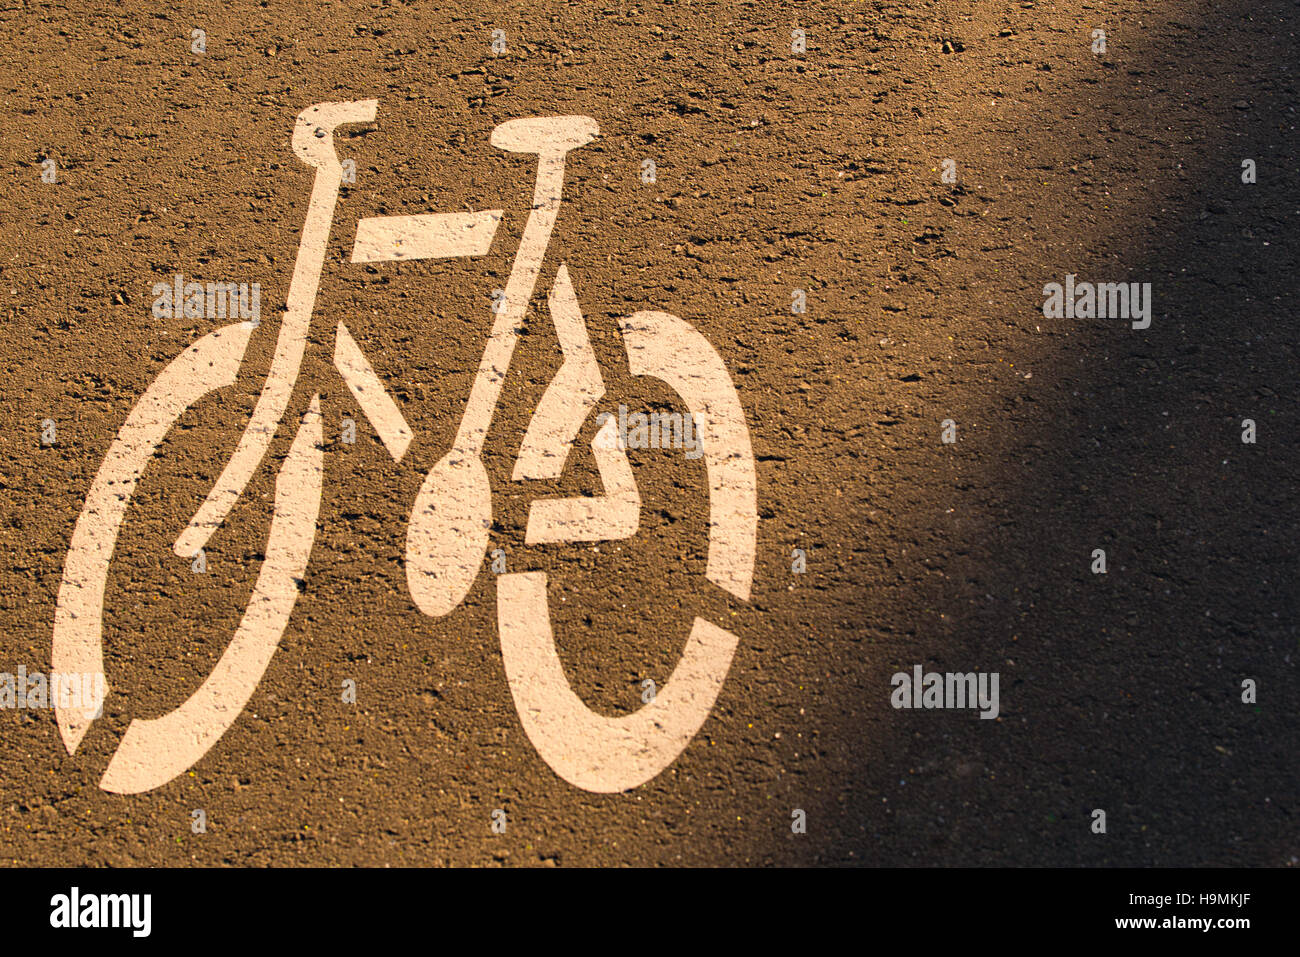 Bicycle Lane Sign Marking on Asphalt Road in Urban Outdoor Setting Stock Photo